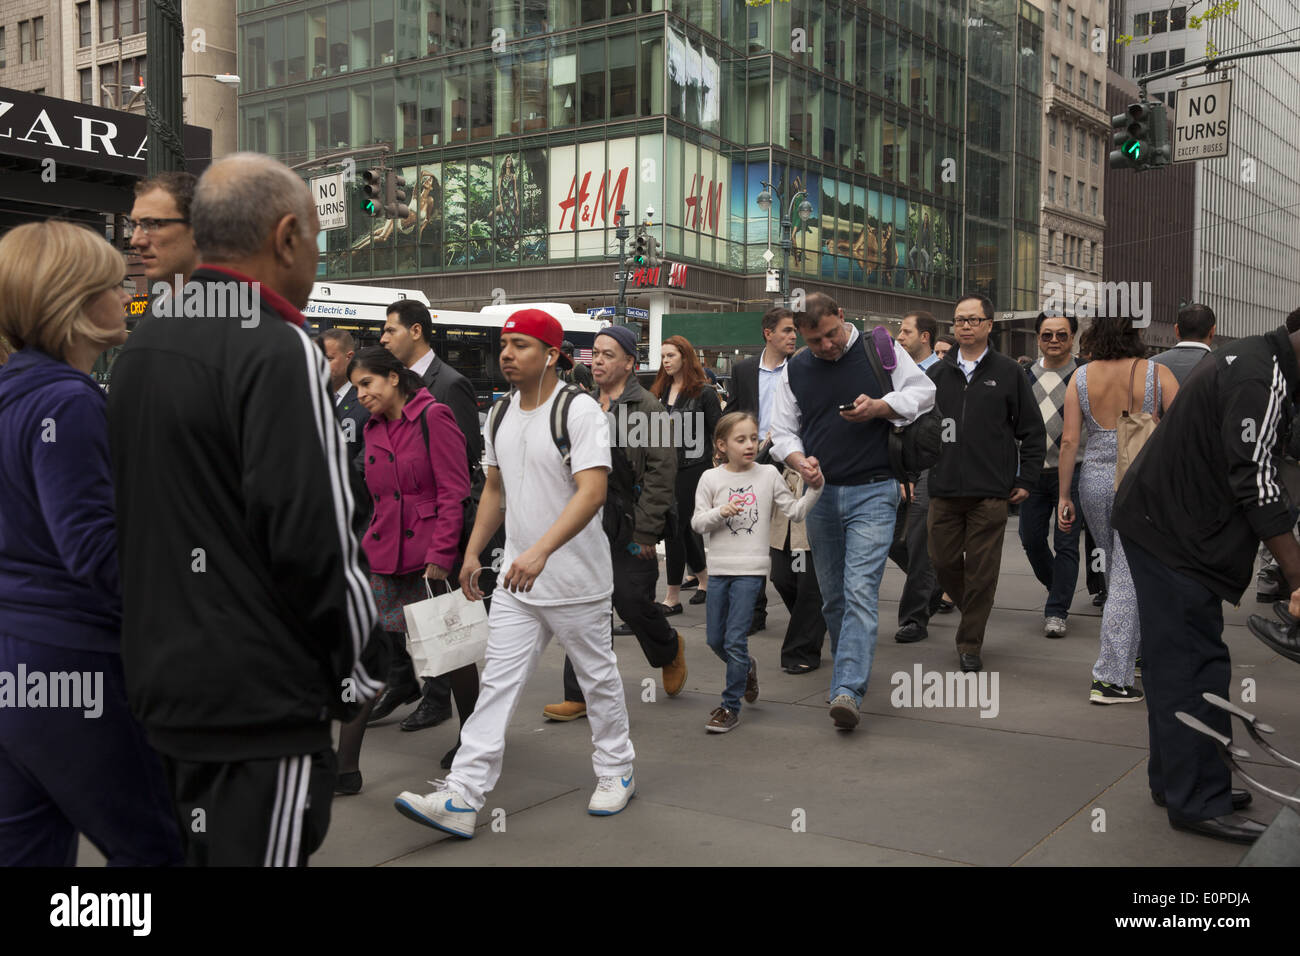 42nd St. near 5th Ave is always crowded with tourists, New Yorkers & office workers. NYC. Stock Photo